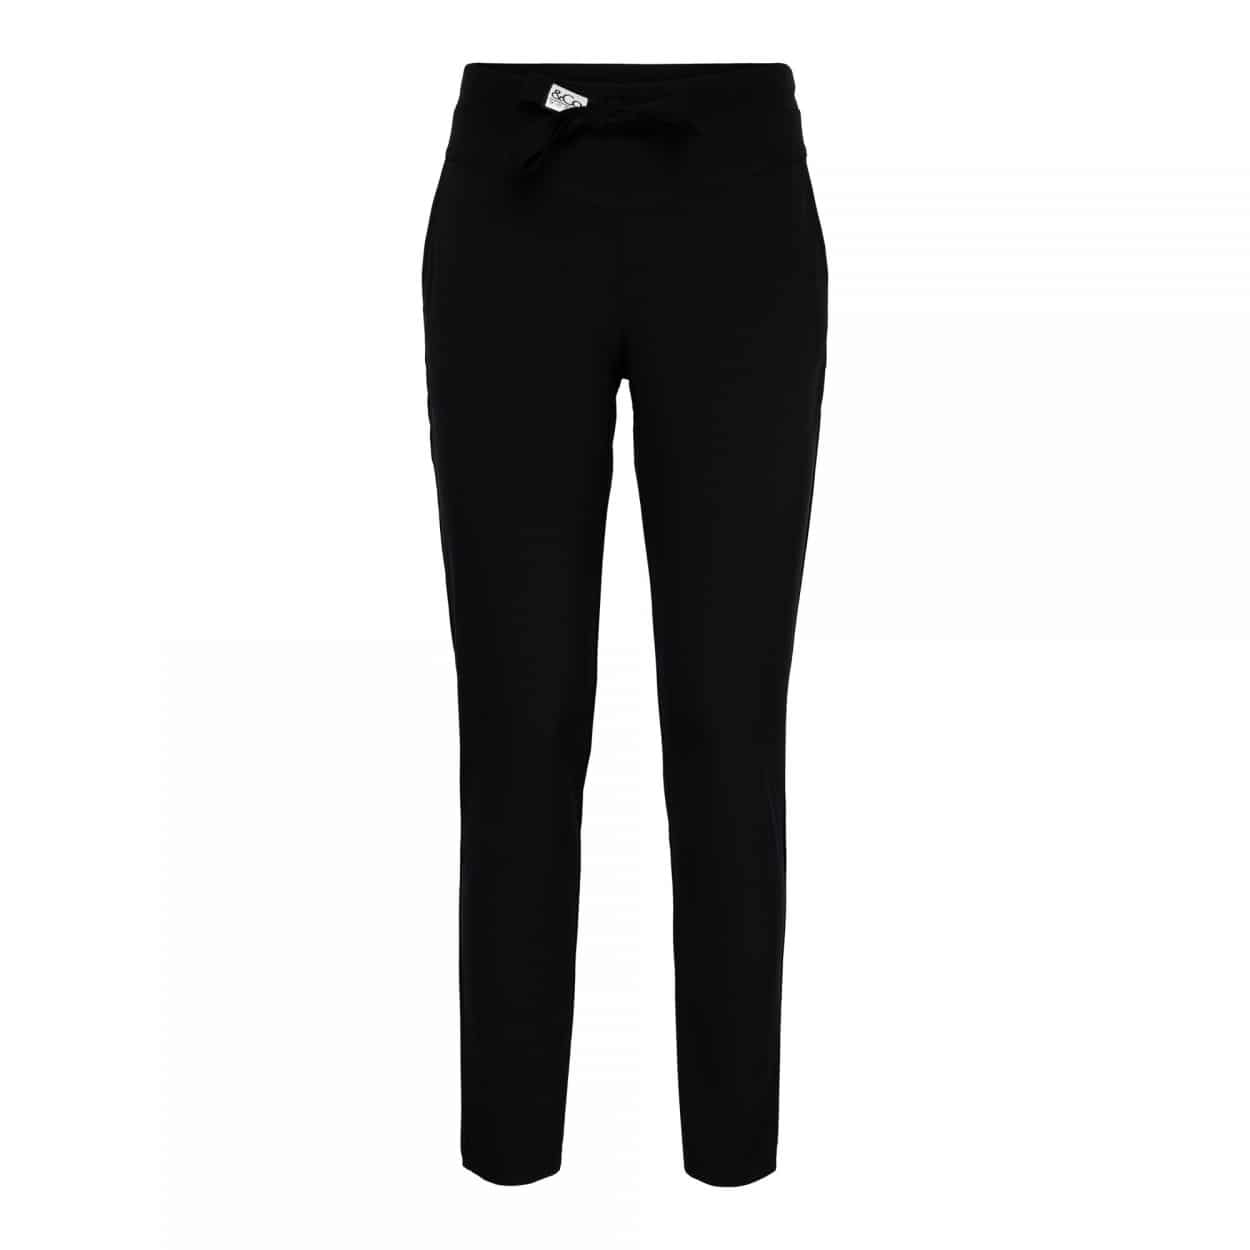 & Co Woman Peppe Travel Pant - Navy